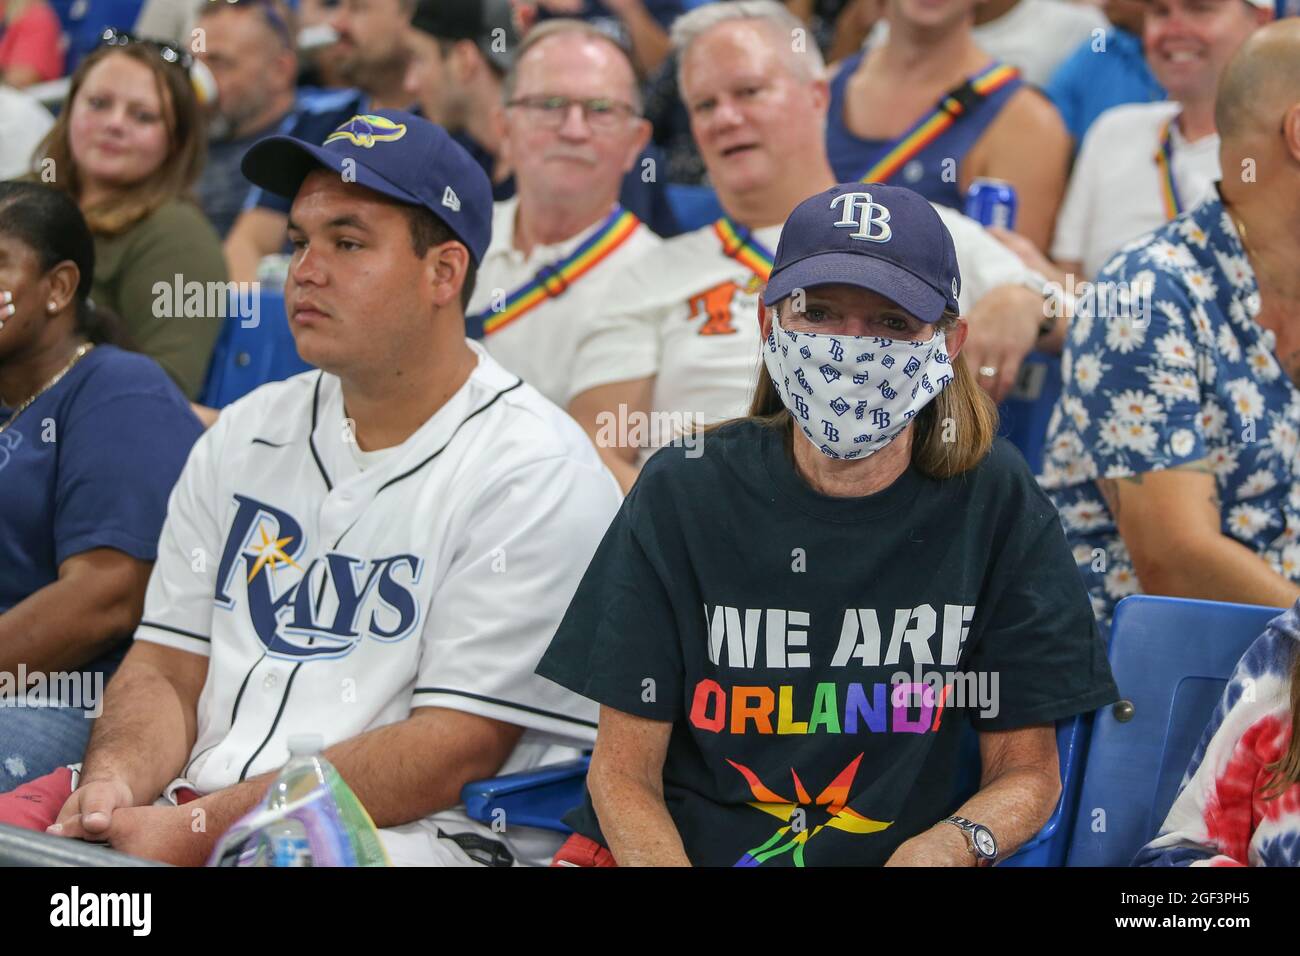 Fans of the Tampa Bay Rays